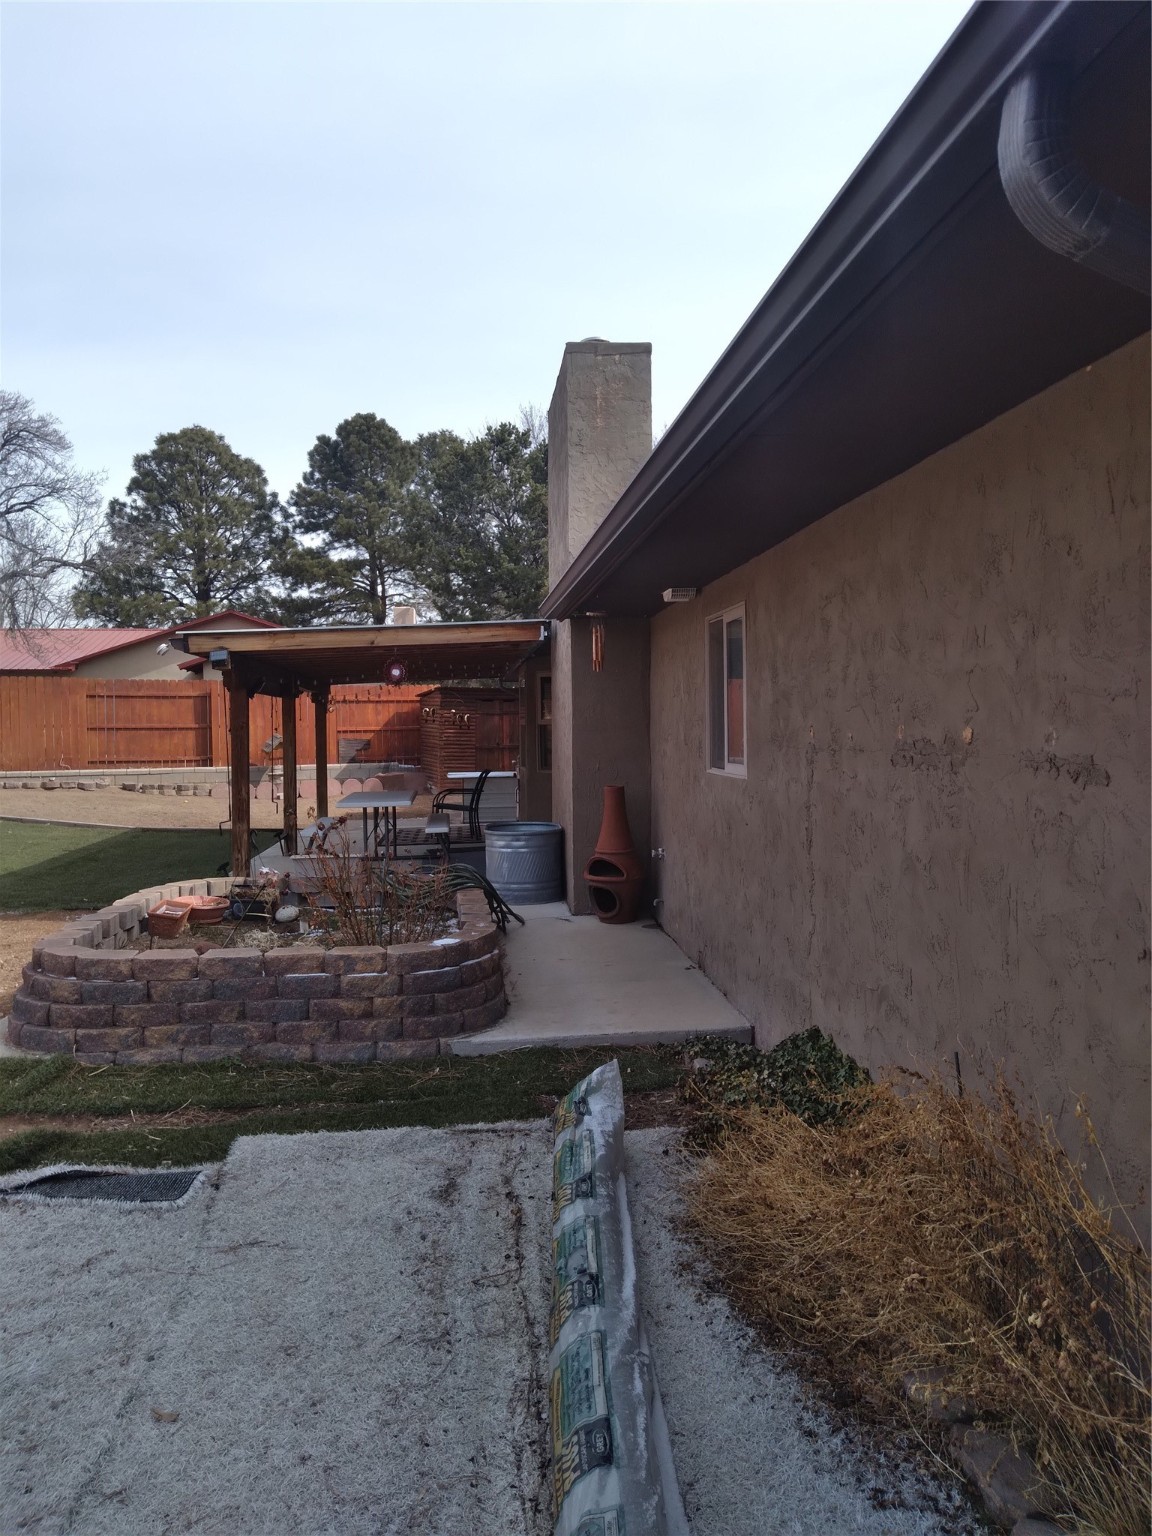 714 meadow Lane, White Rock, New Mexico 87547, 3 Bedrooms Bedrooms, ,2 BathroomsBathrooms,Residential,For Sale,714 meadow Lane,202336312